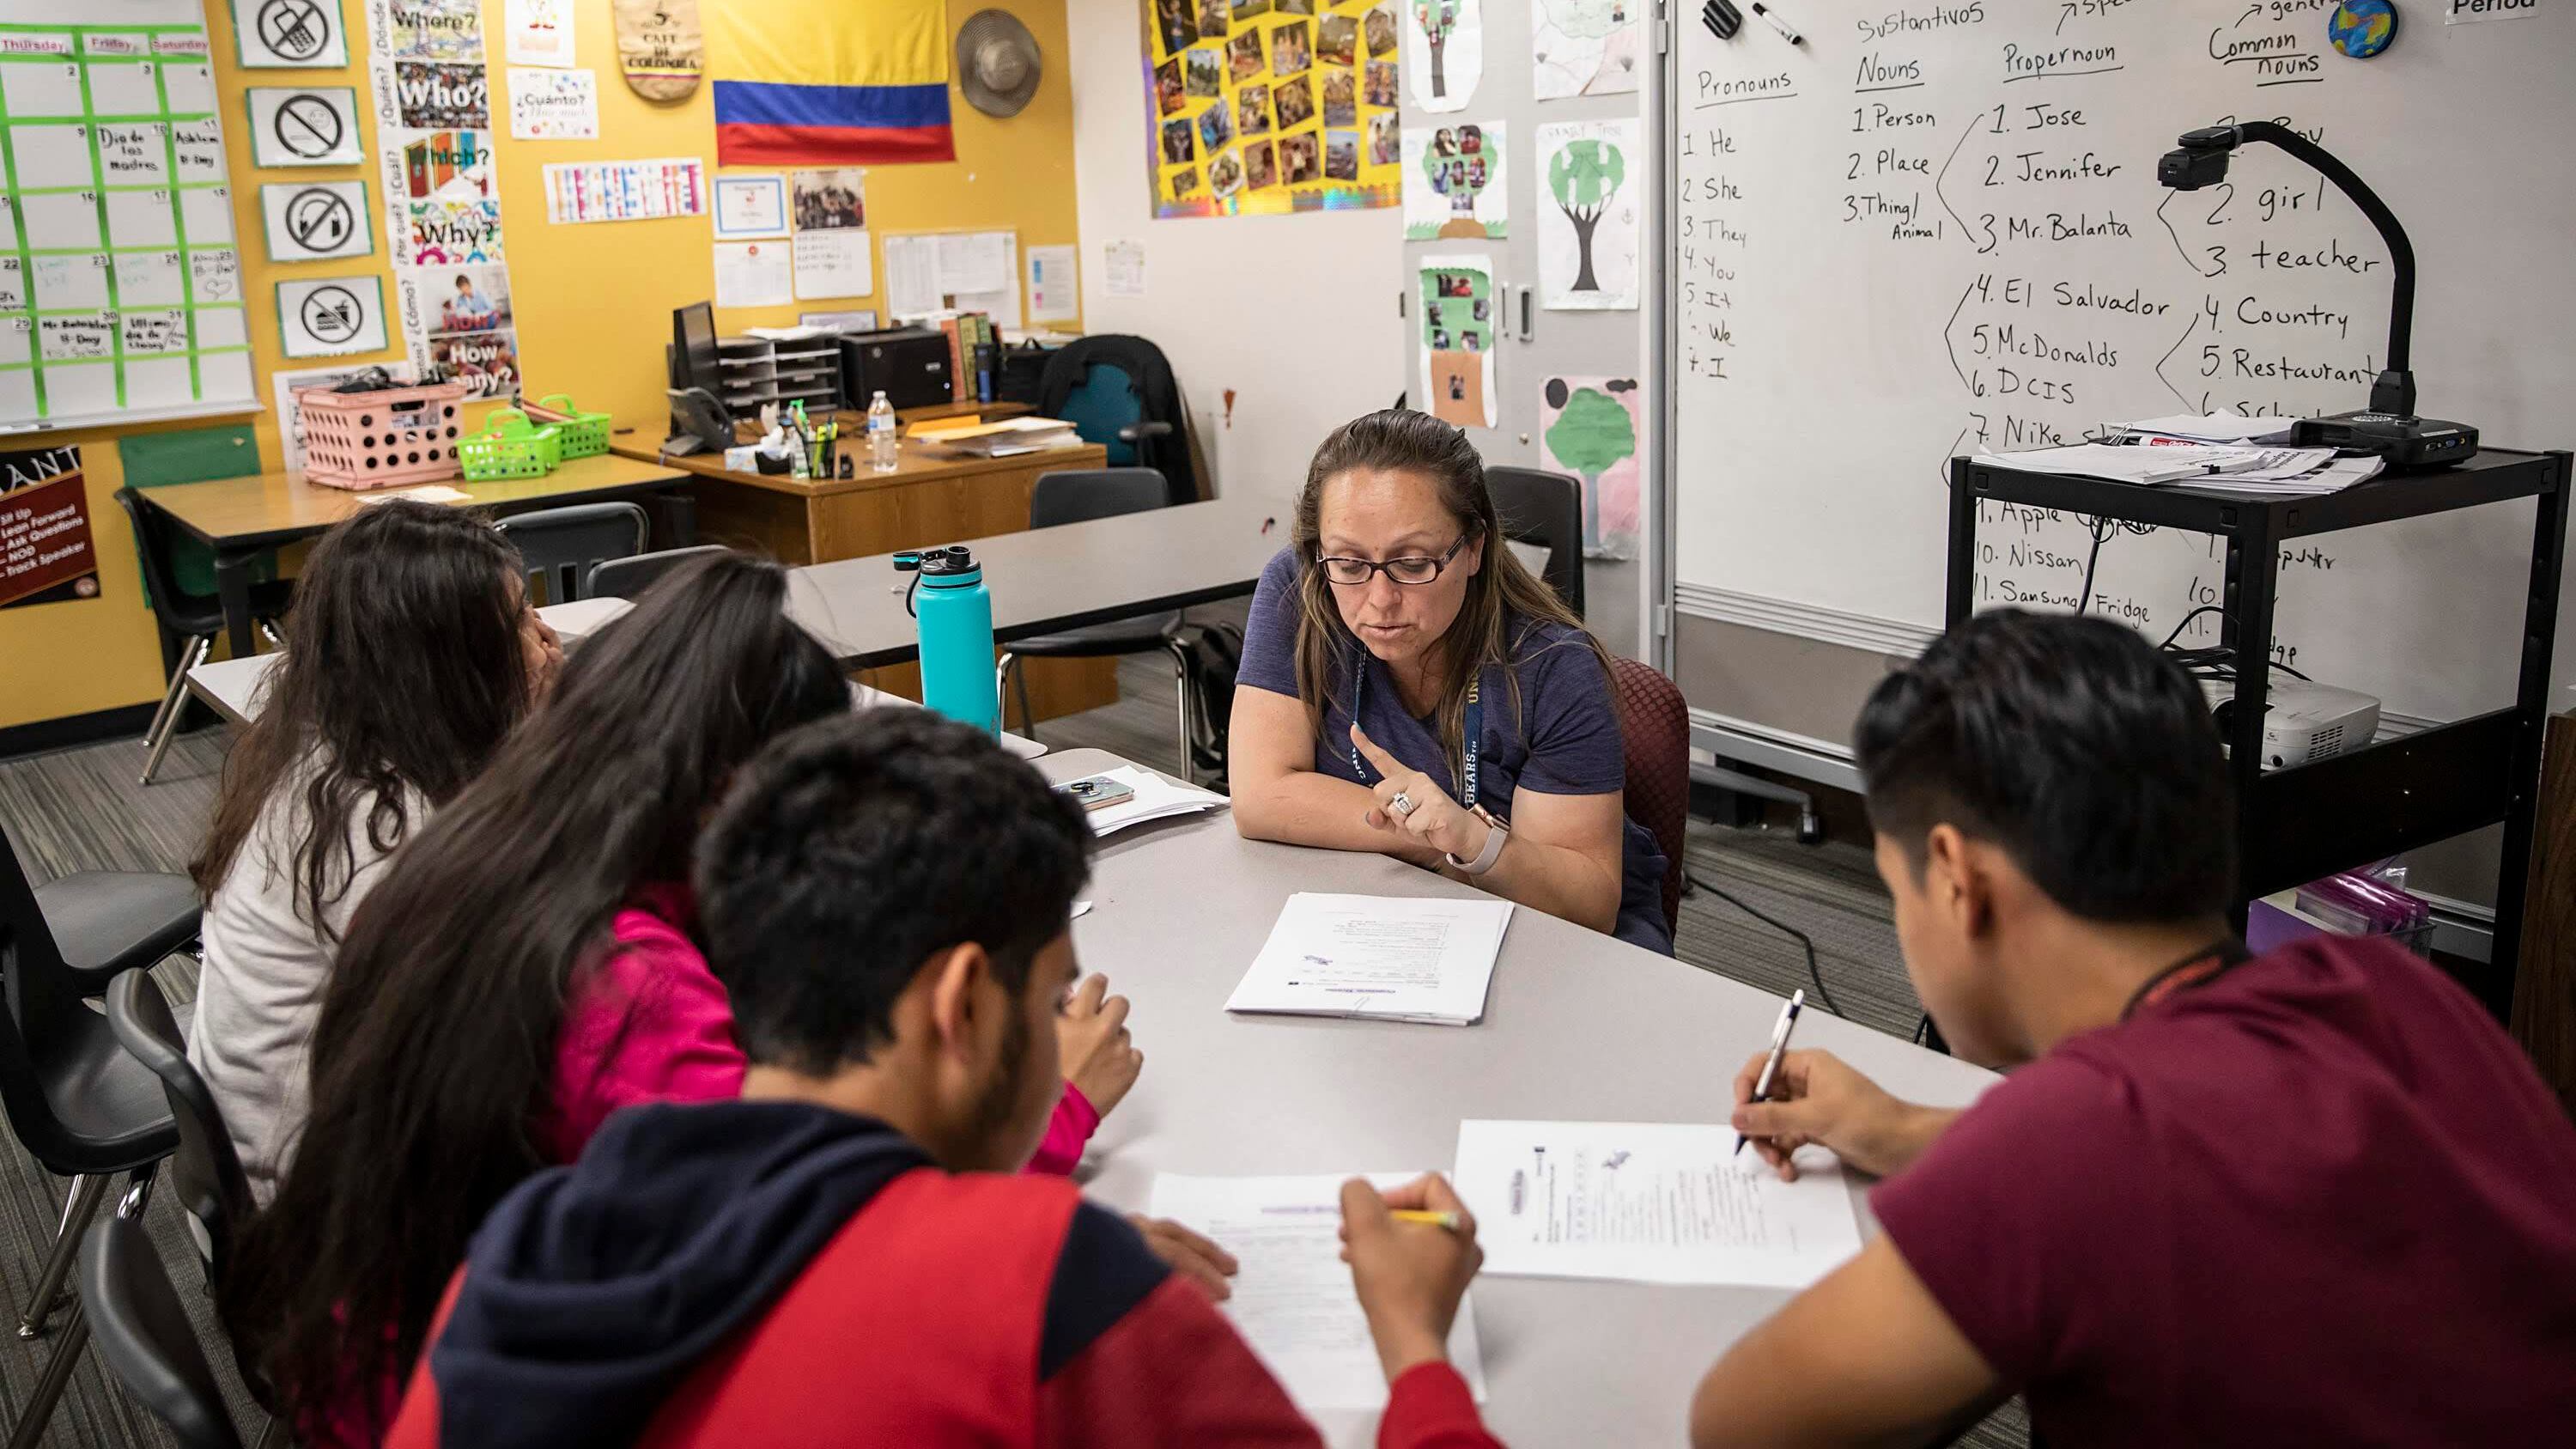 A woman wearing glasses and a school lanyard sits at a rectangular table with four adolescent students as she holds her finger up while explaining. The walls of the classroom are covered in posters and signs with English keywords and vocabulary.